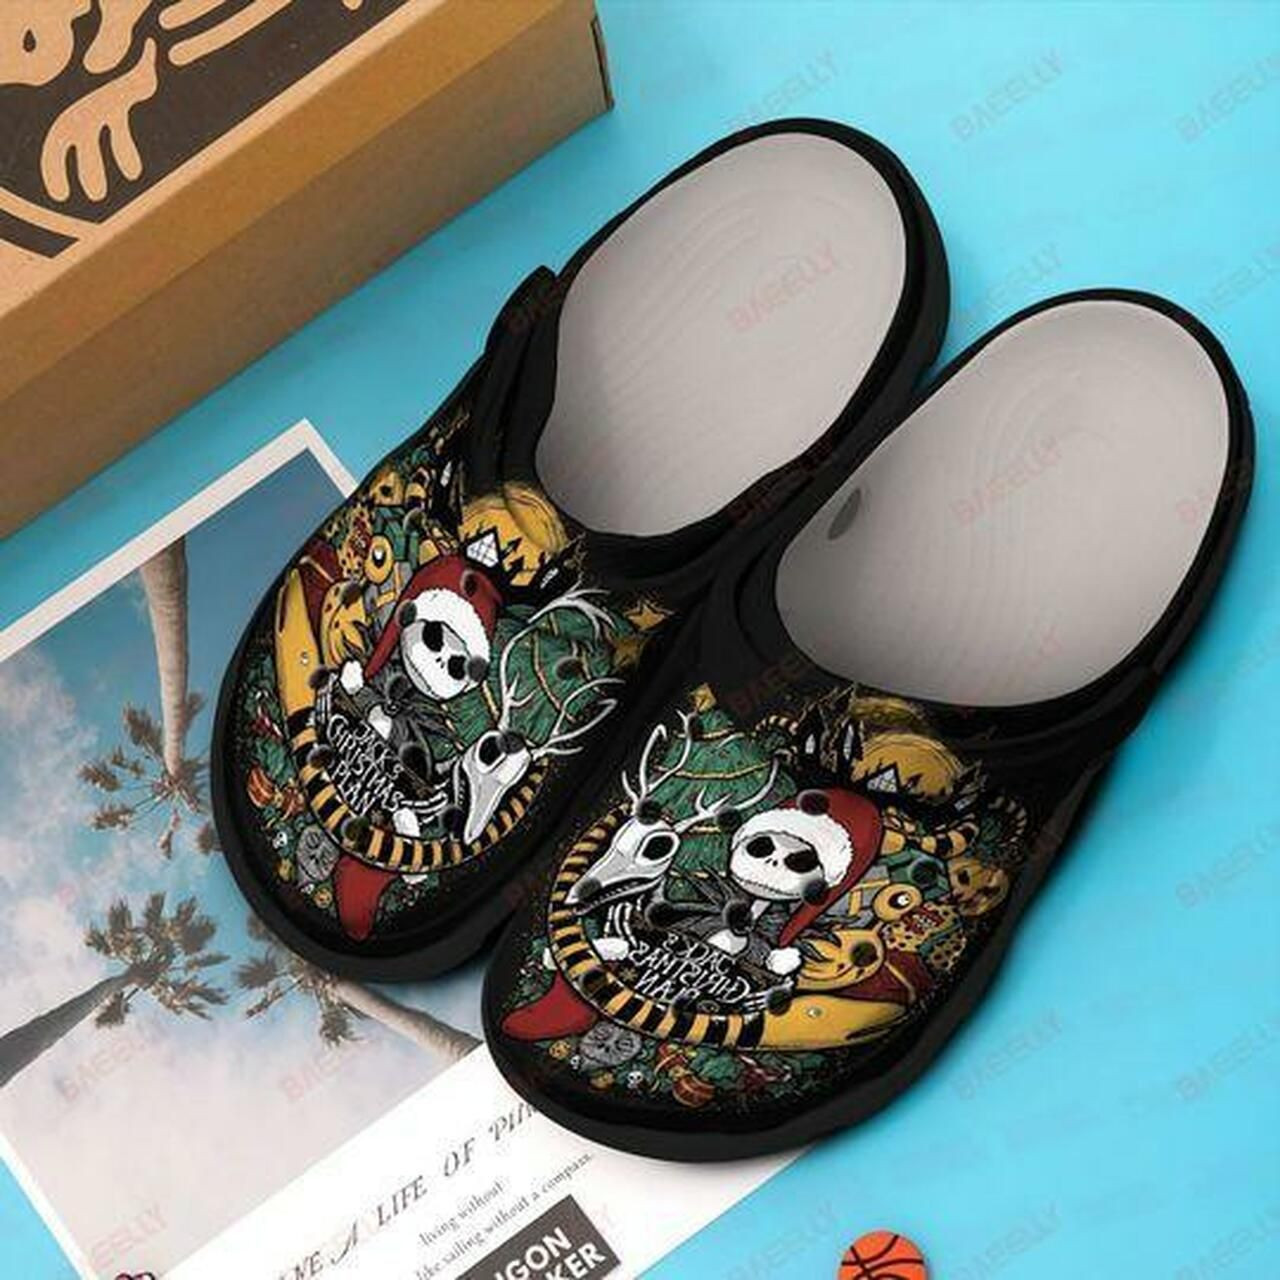 The Nightmare Before Christmas Jack Skellington Crocss Crocband Clog Comfortable Water Shoes